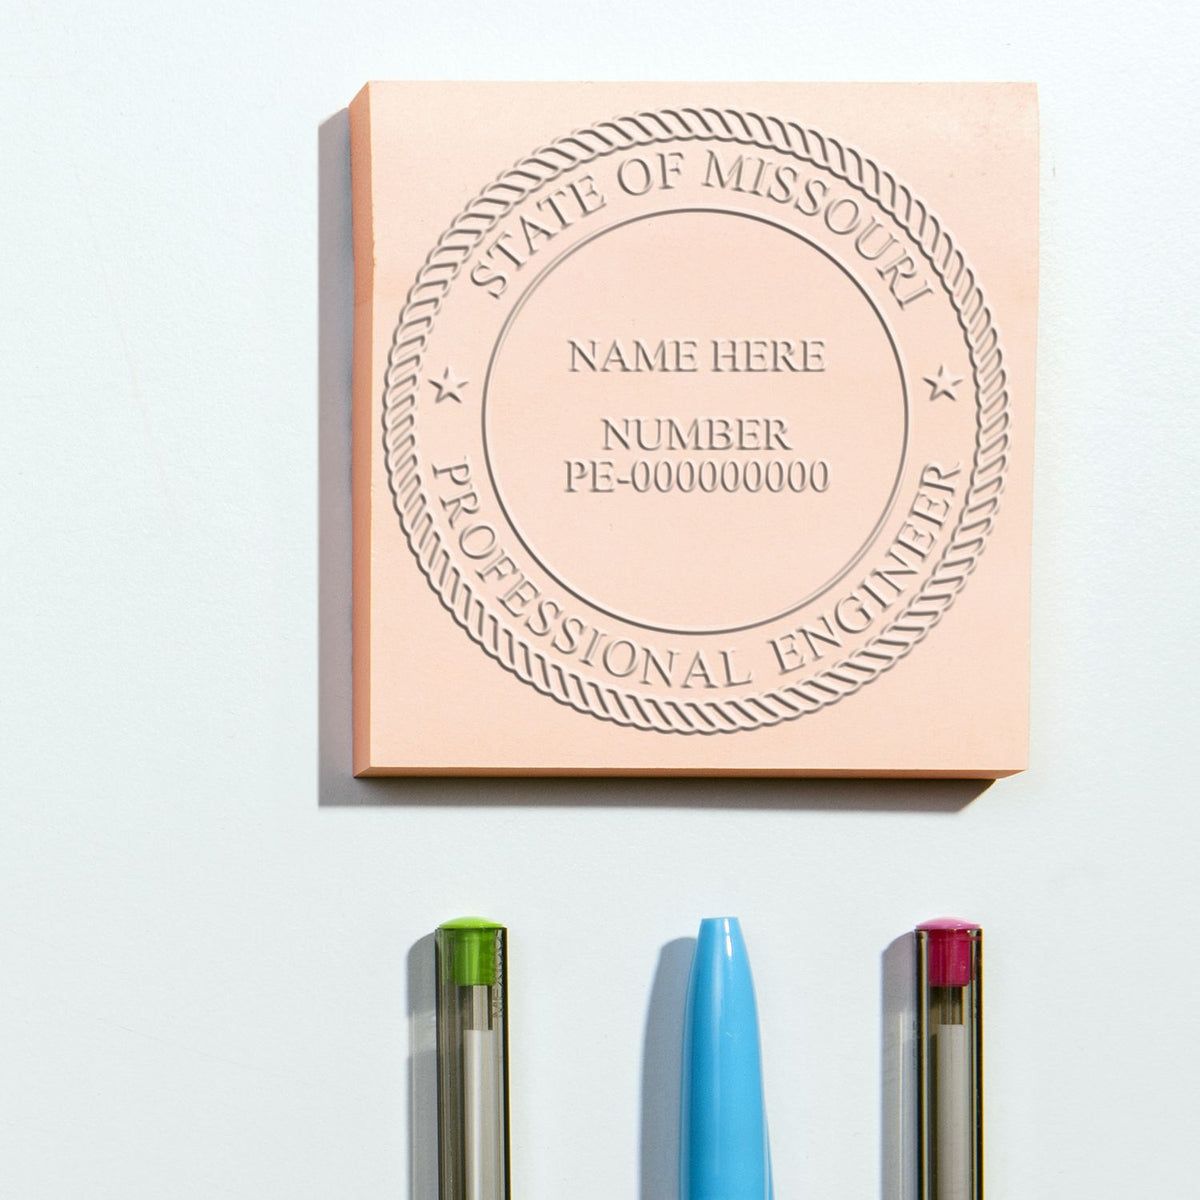 A stamped imprint of the Gift Missouri Engineer Seal in this stylish lifestyle photo, setting the tone for a unique and personalized product.